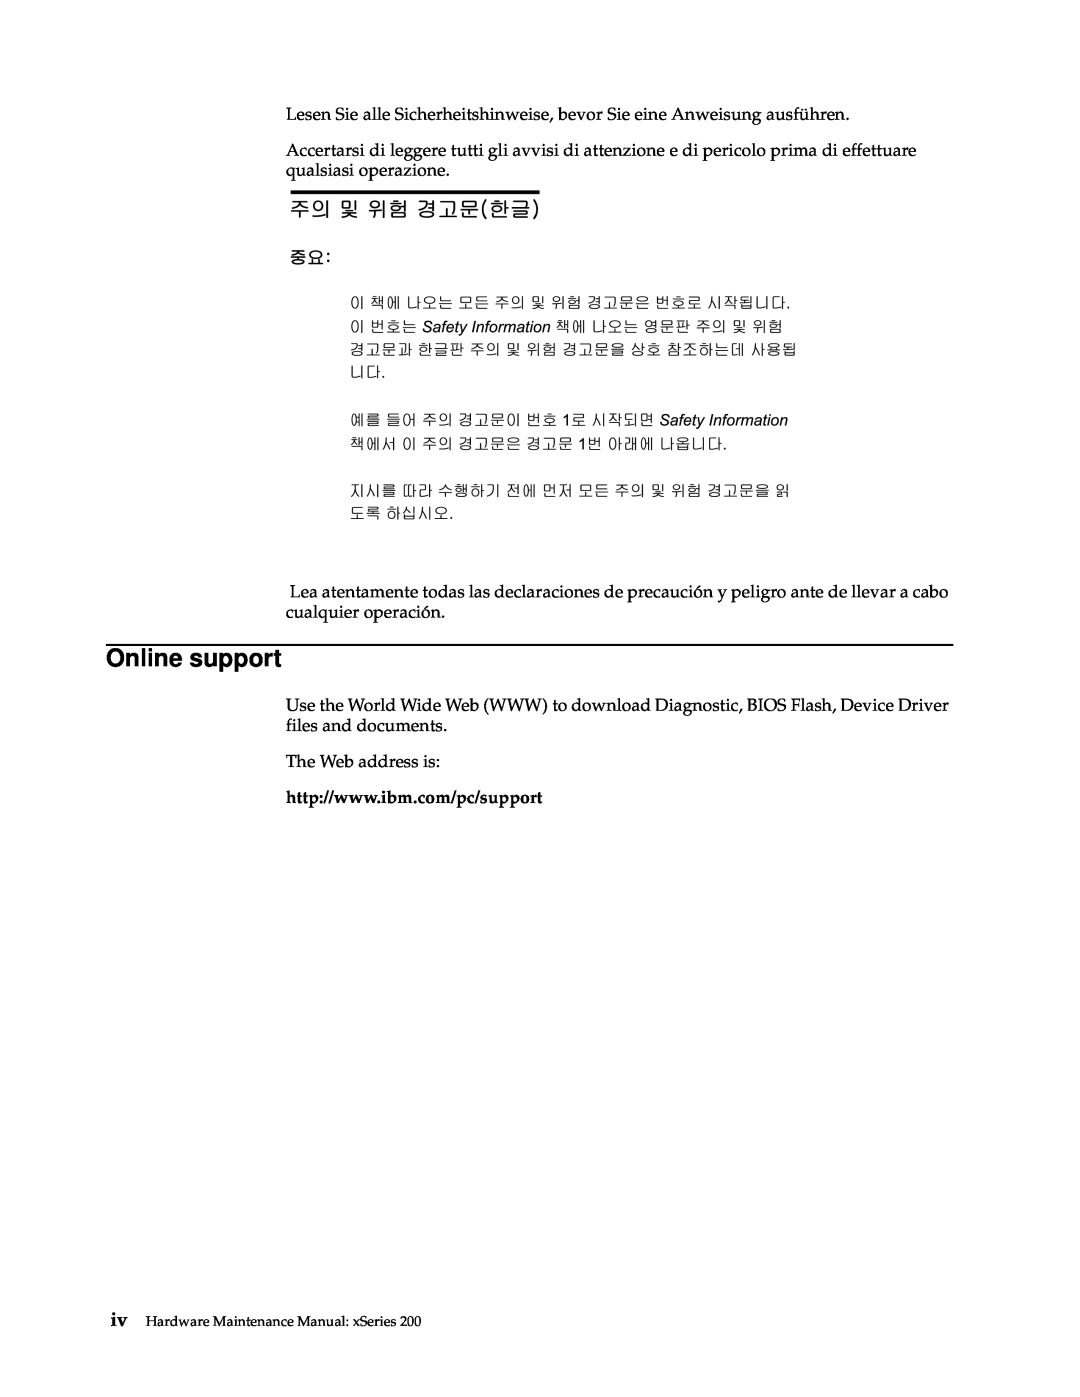 IBM x Series 200 manual Online support 